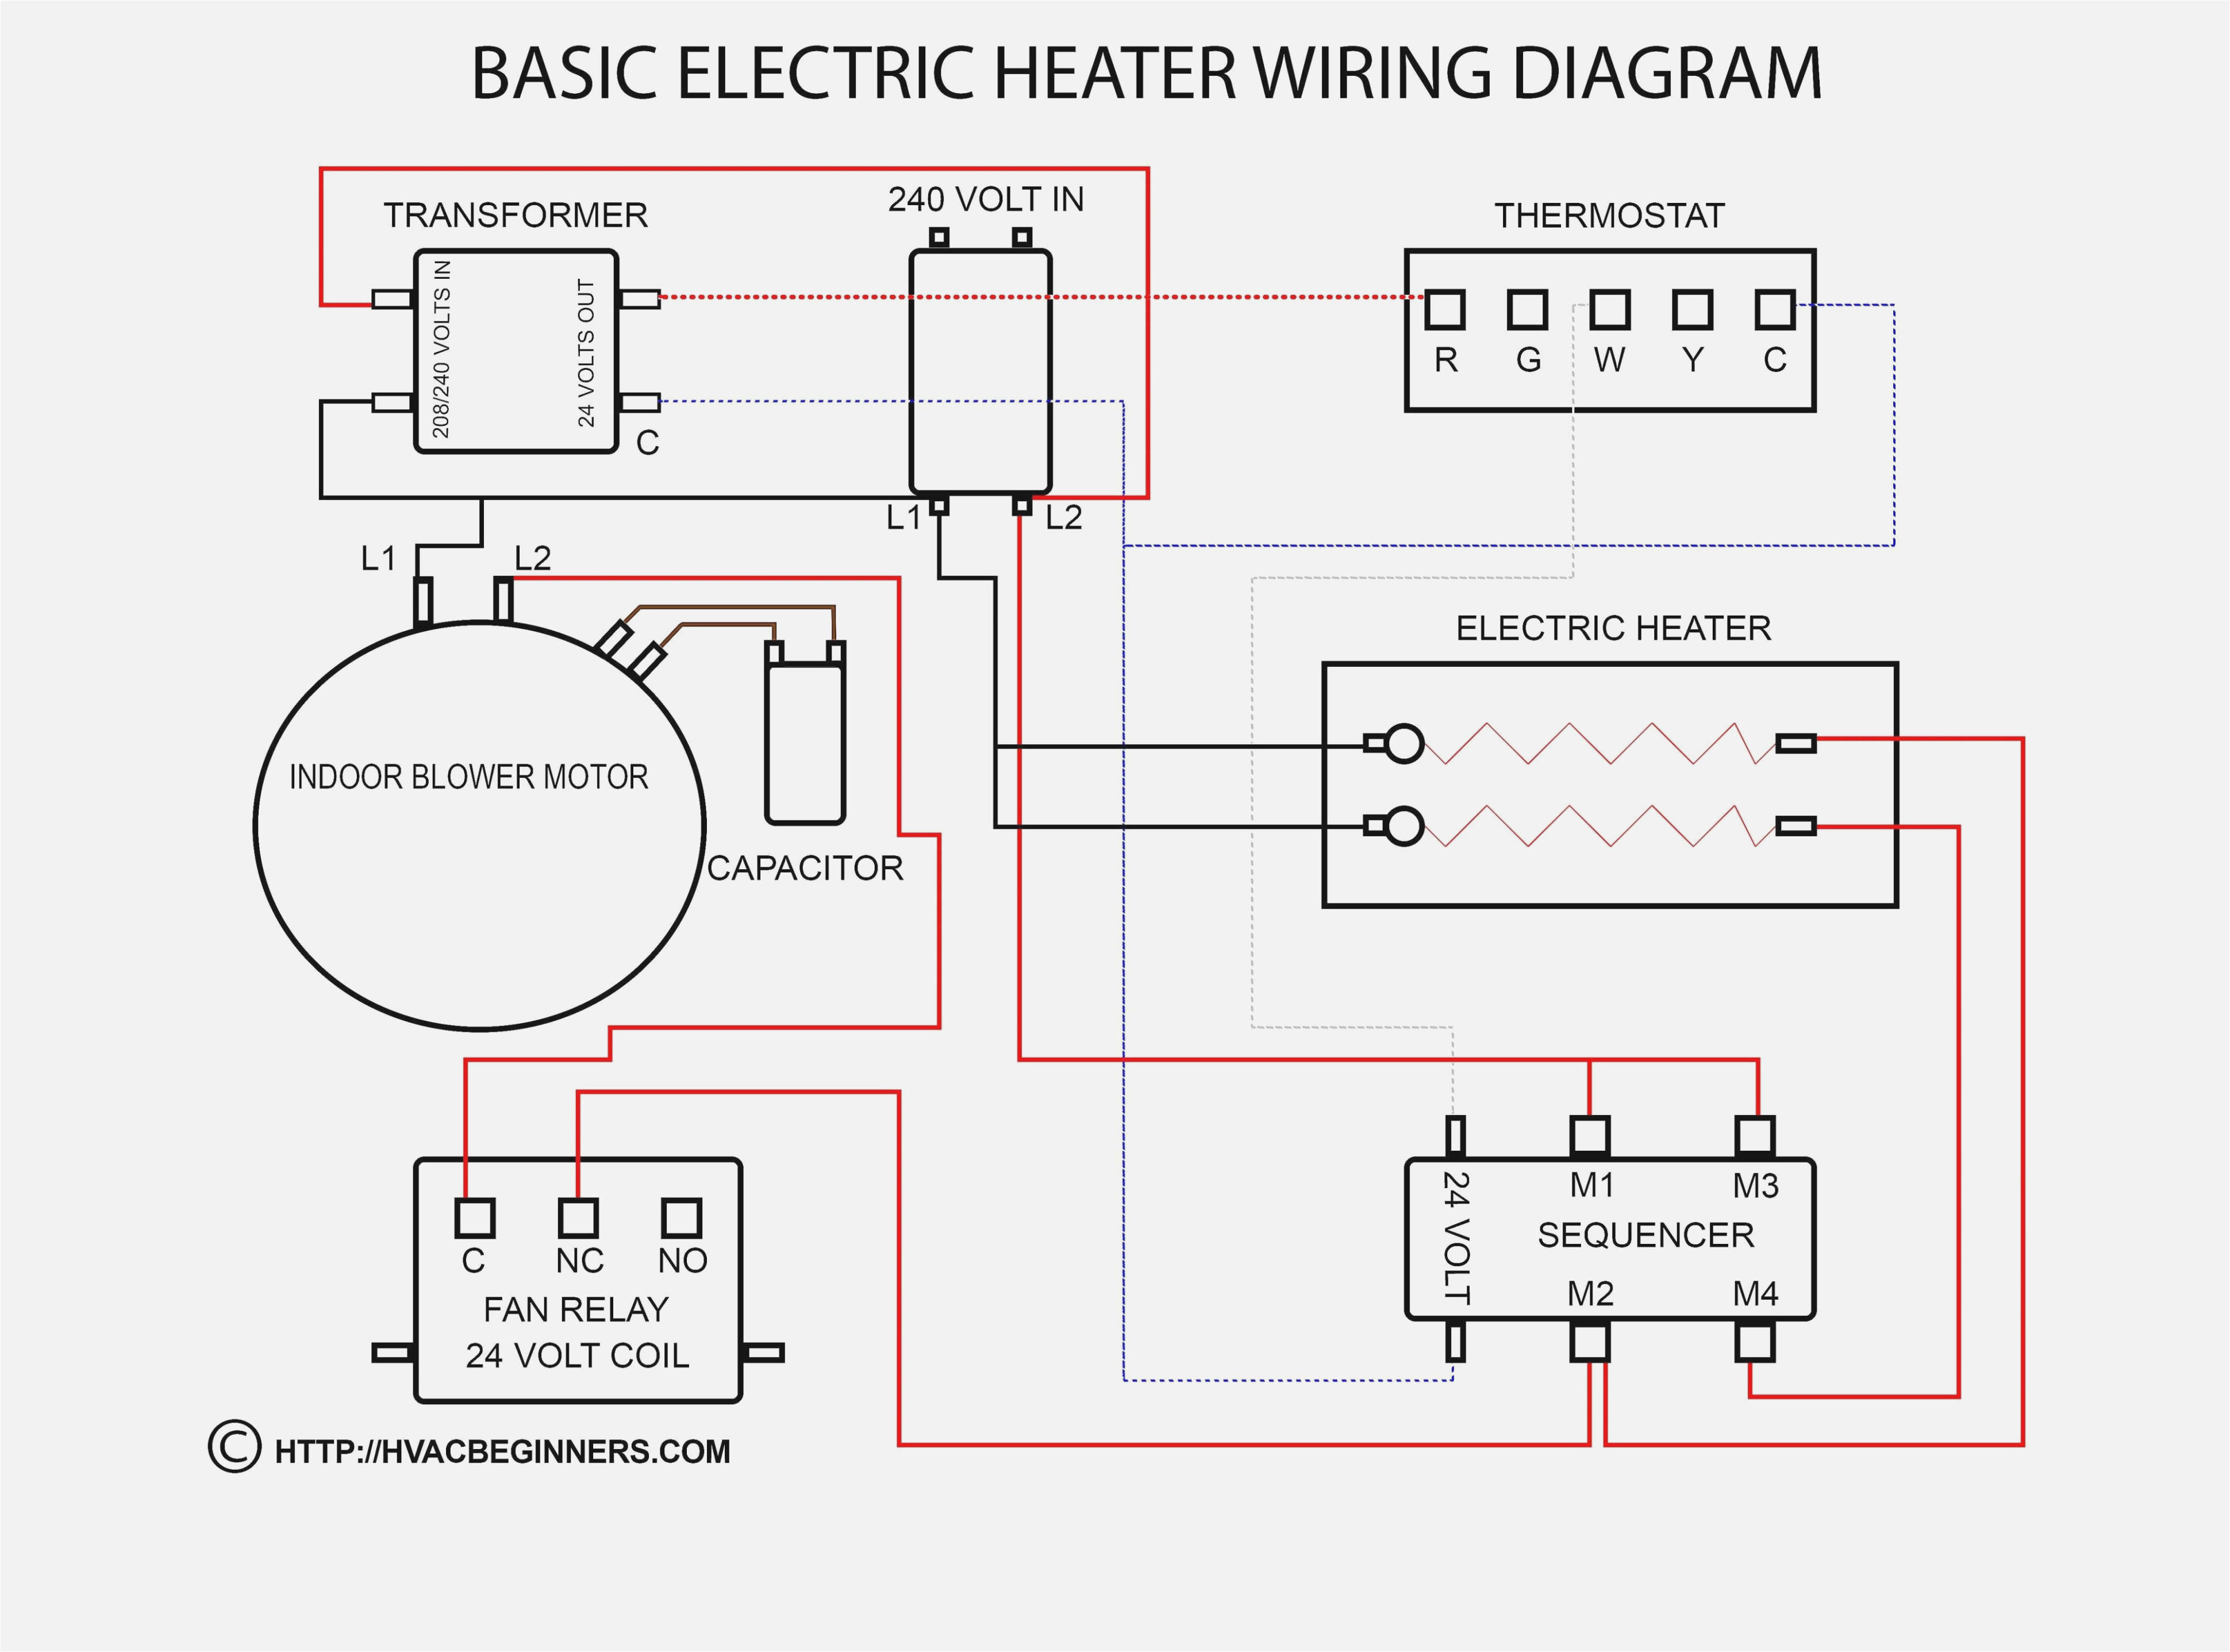 heating wiring diagrams wiring diagram page wiring guide for domestic heating systems by honeywell free download